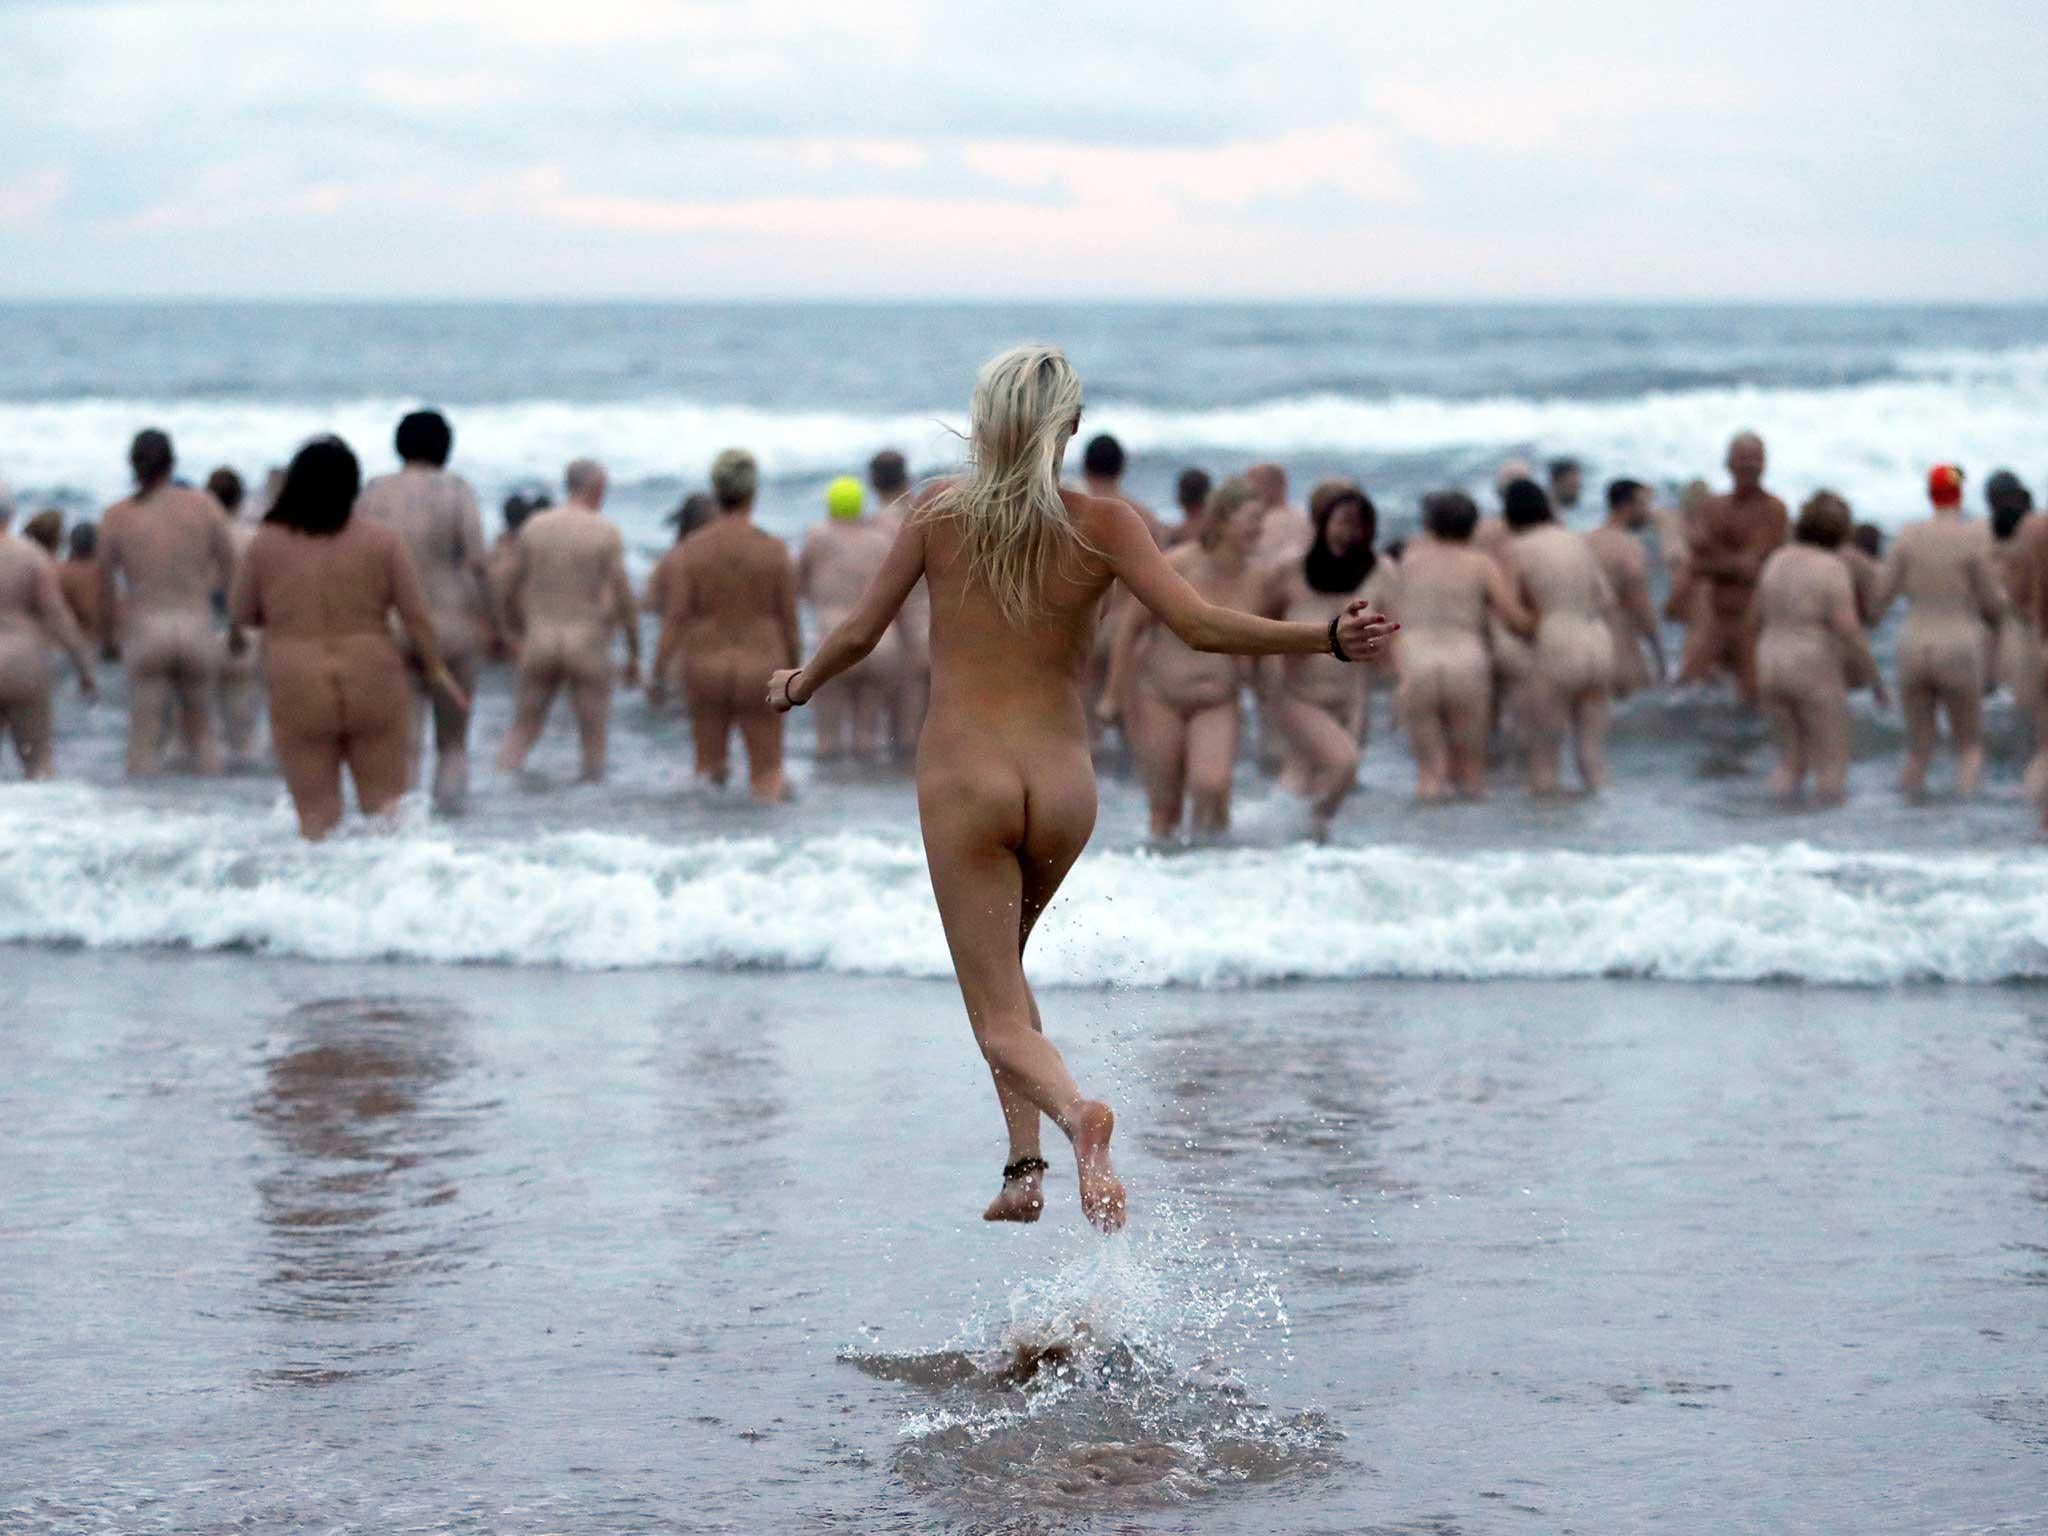 The North East Skinny Dip, where people run naked in aid of charity